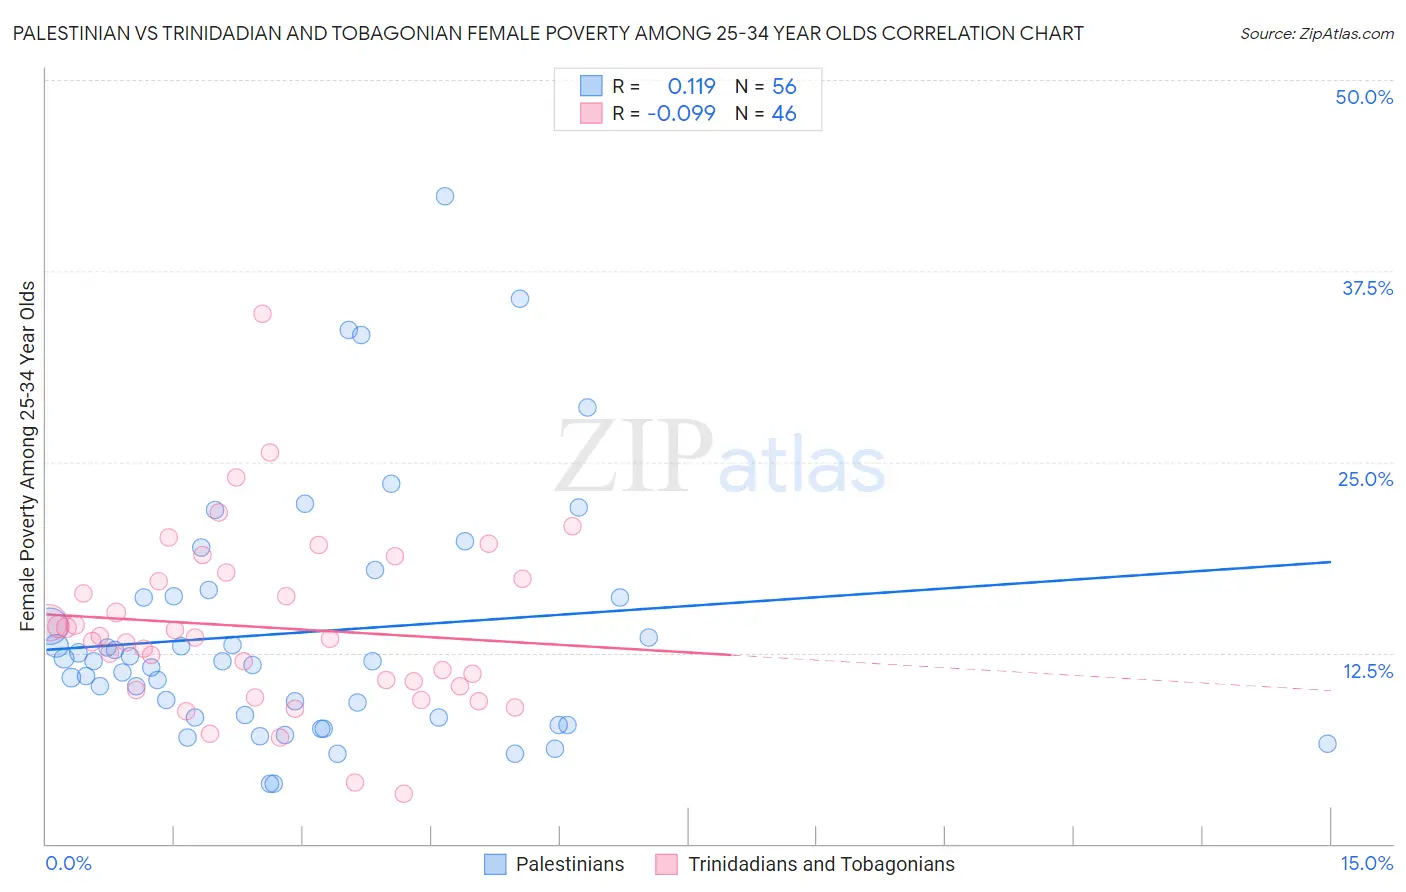 Palestinian vs Trinidadian and Tobagonian Female Poverty Among 25-34 Year Olds